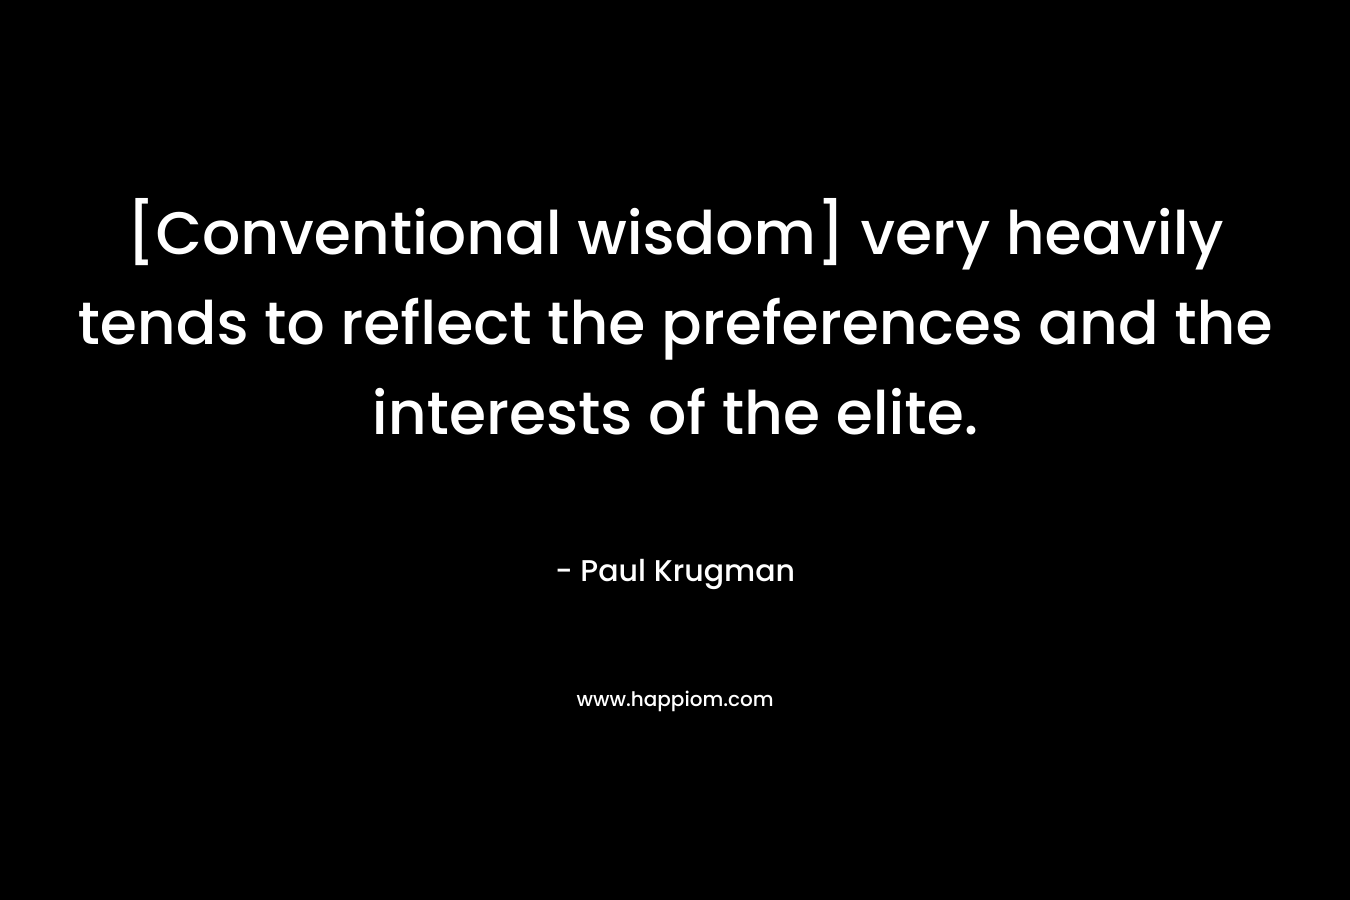 [Conventional wisdom] very heavily tends to reflect the preferences and the interests of the elite.